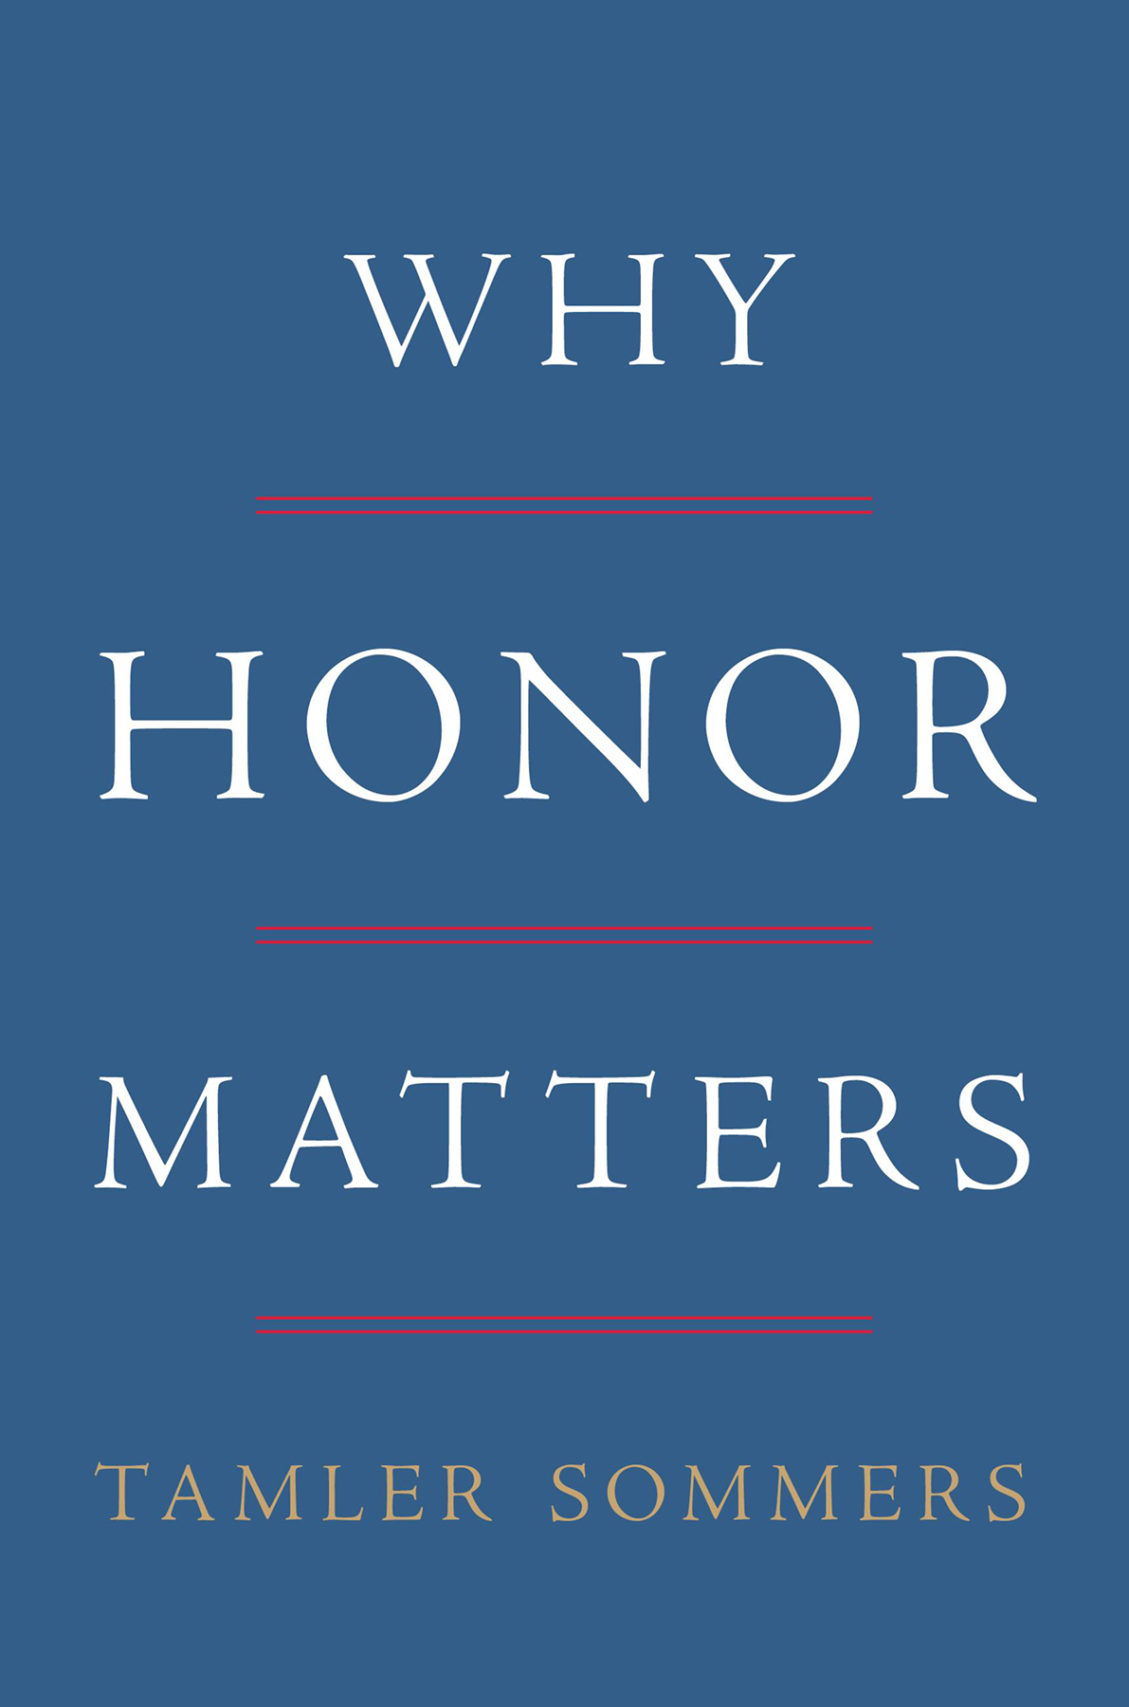 Why Honor Matters by Tamler Sommers